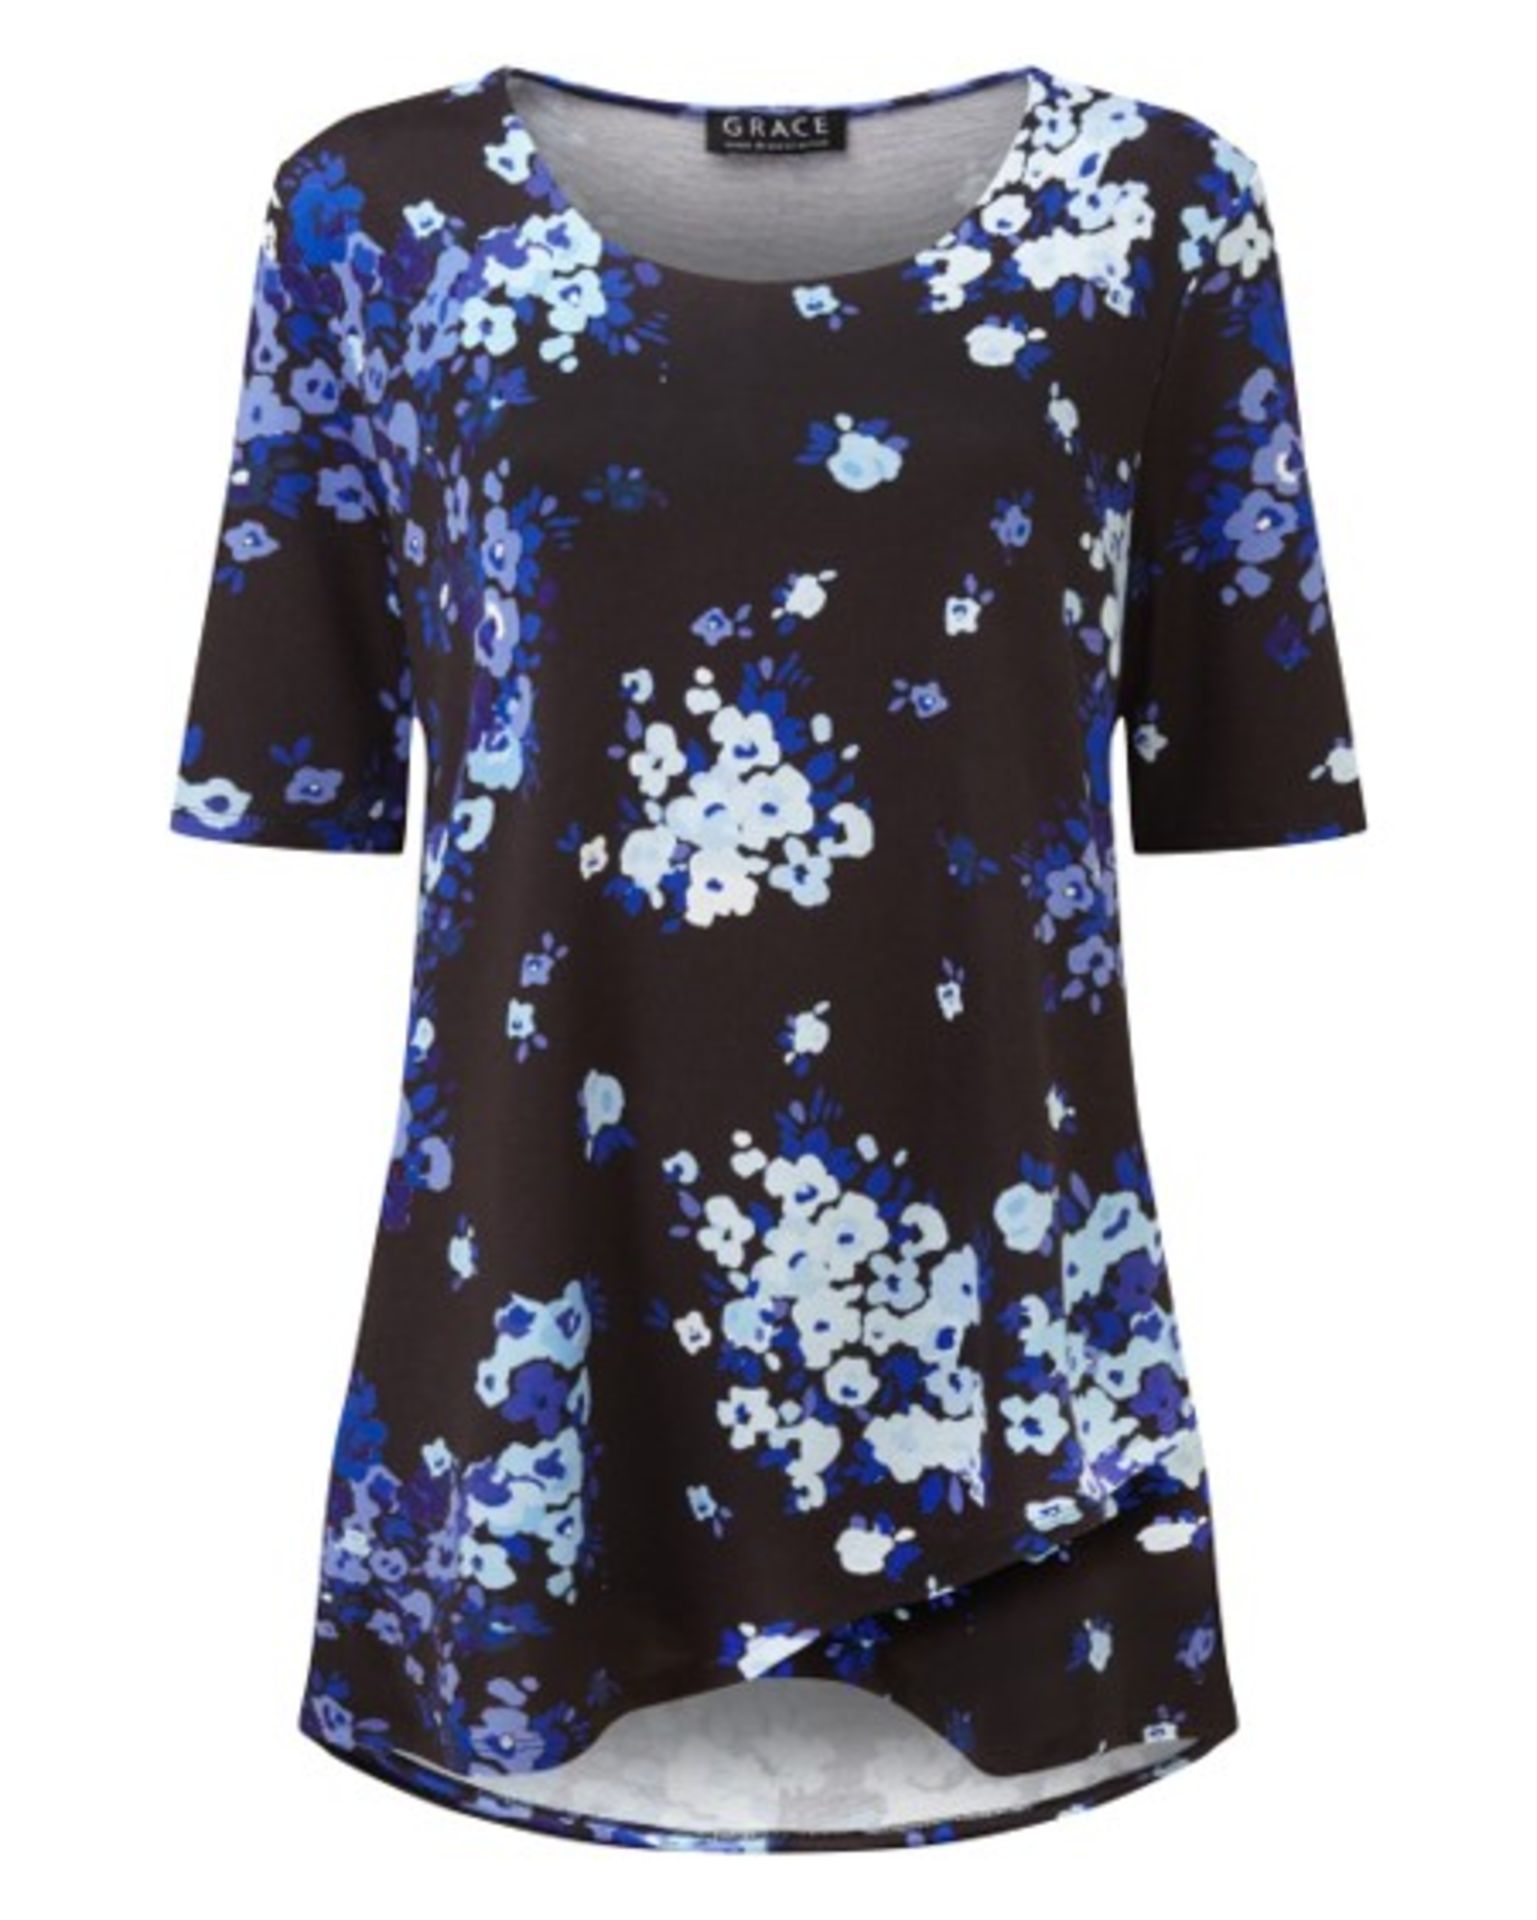 *Thirty Black & Blue Floral Blouses by Grace Sizes